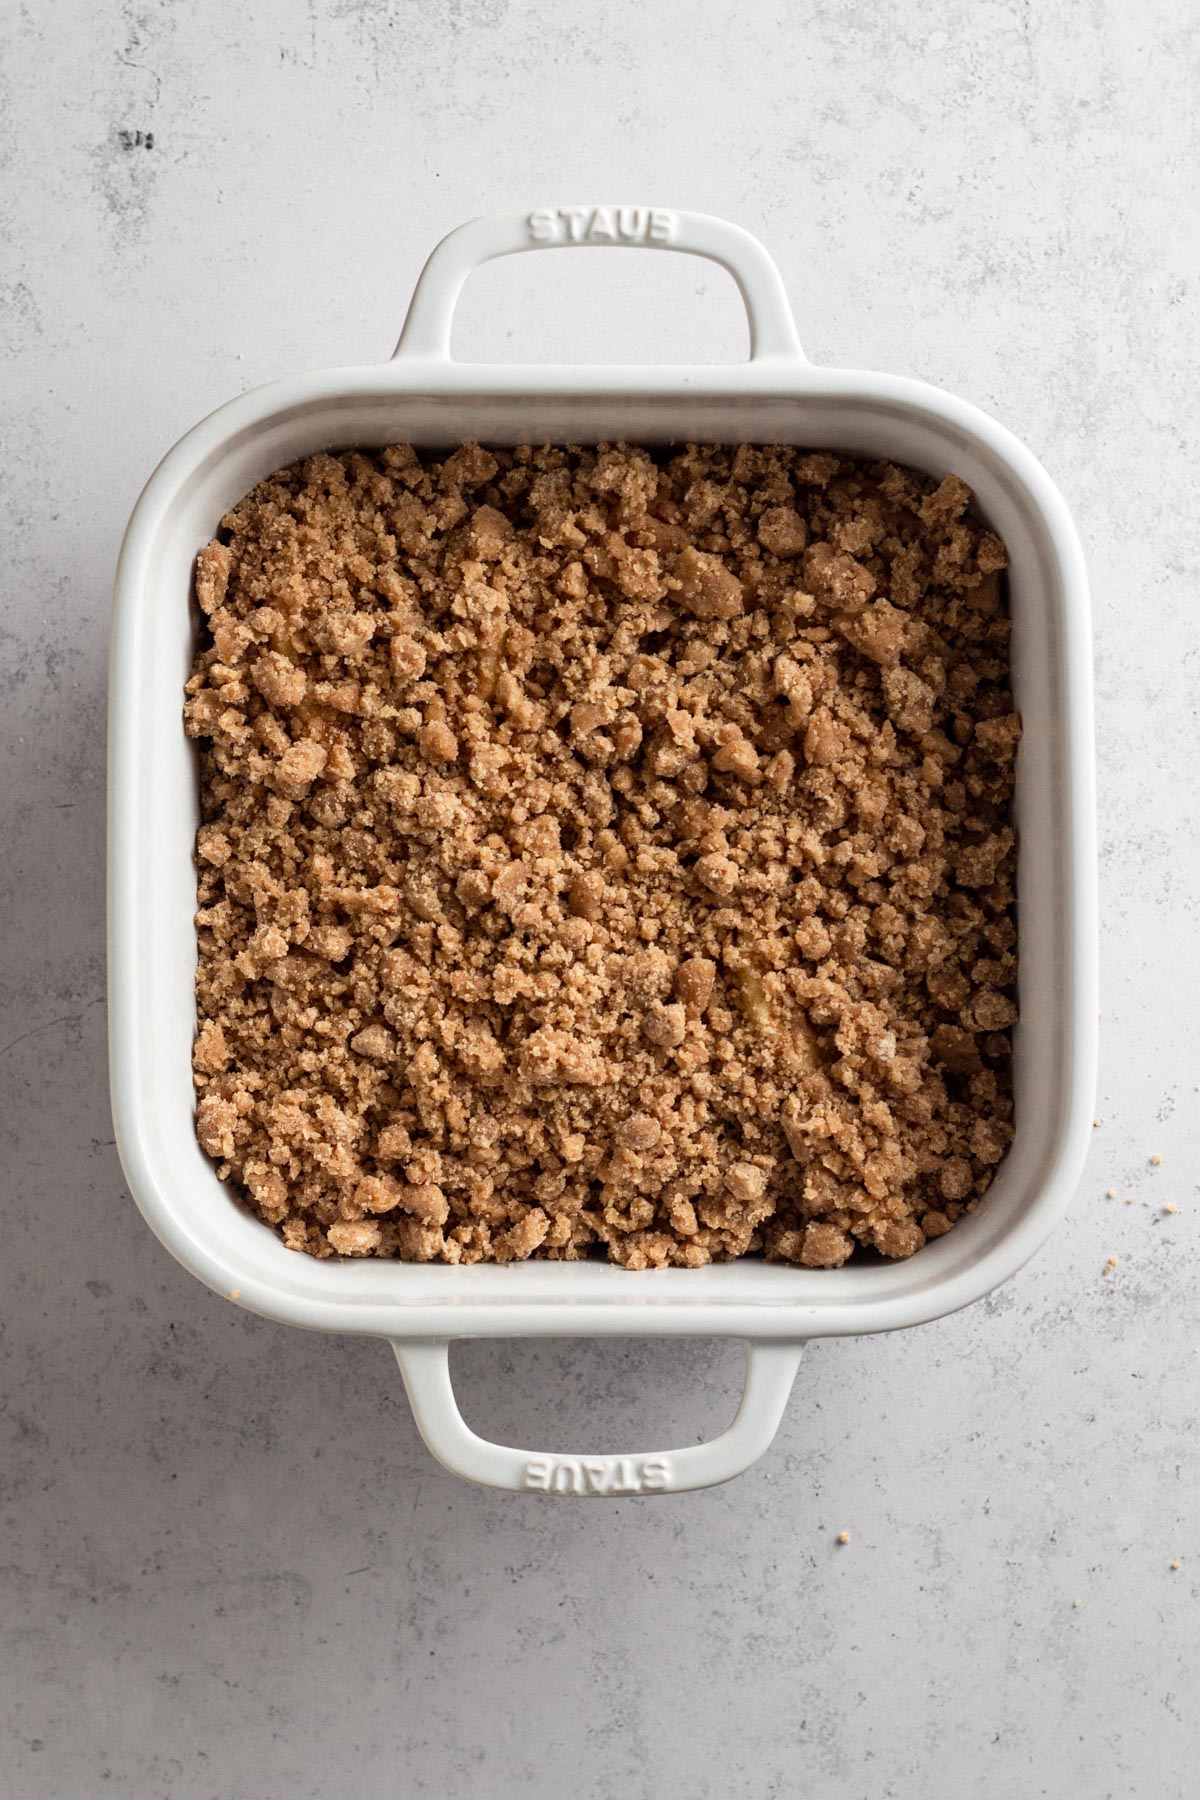 Streusel-topped bars in a white baking dish.